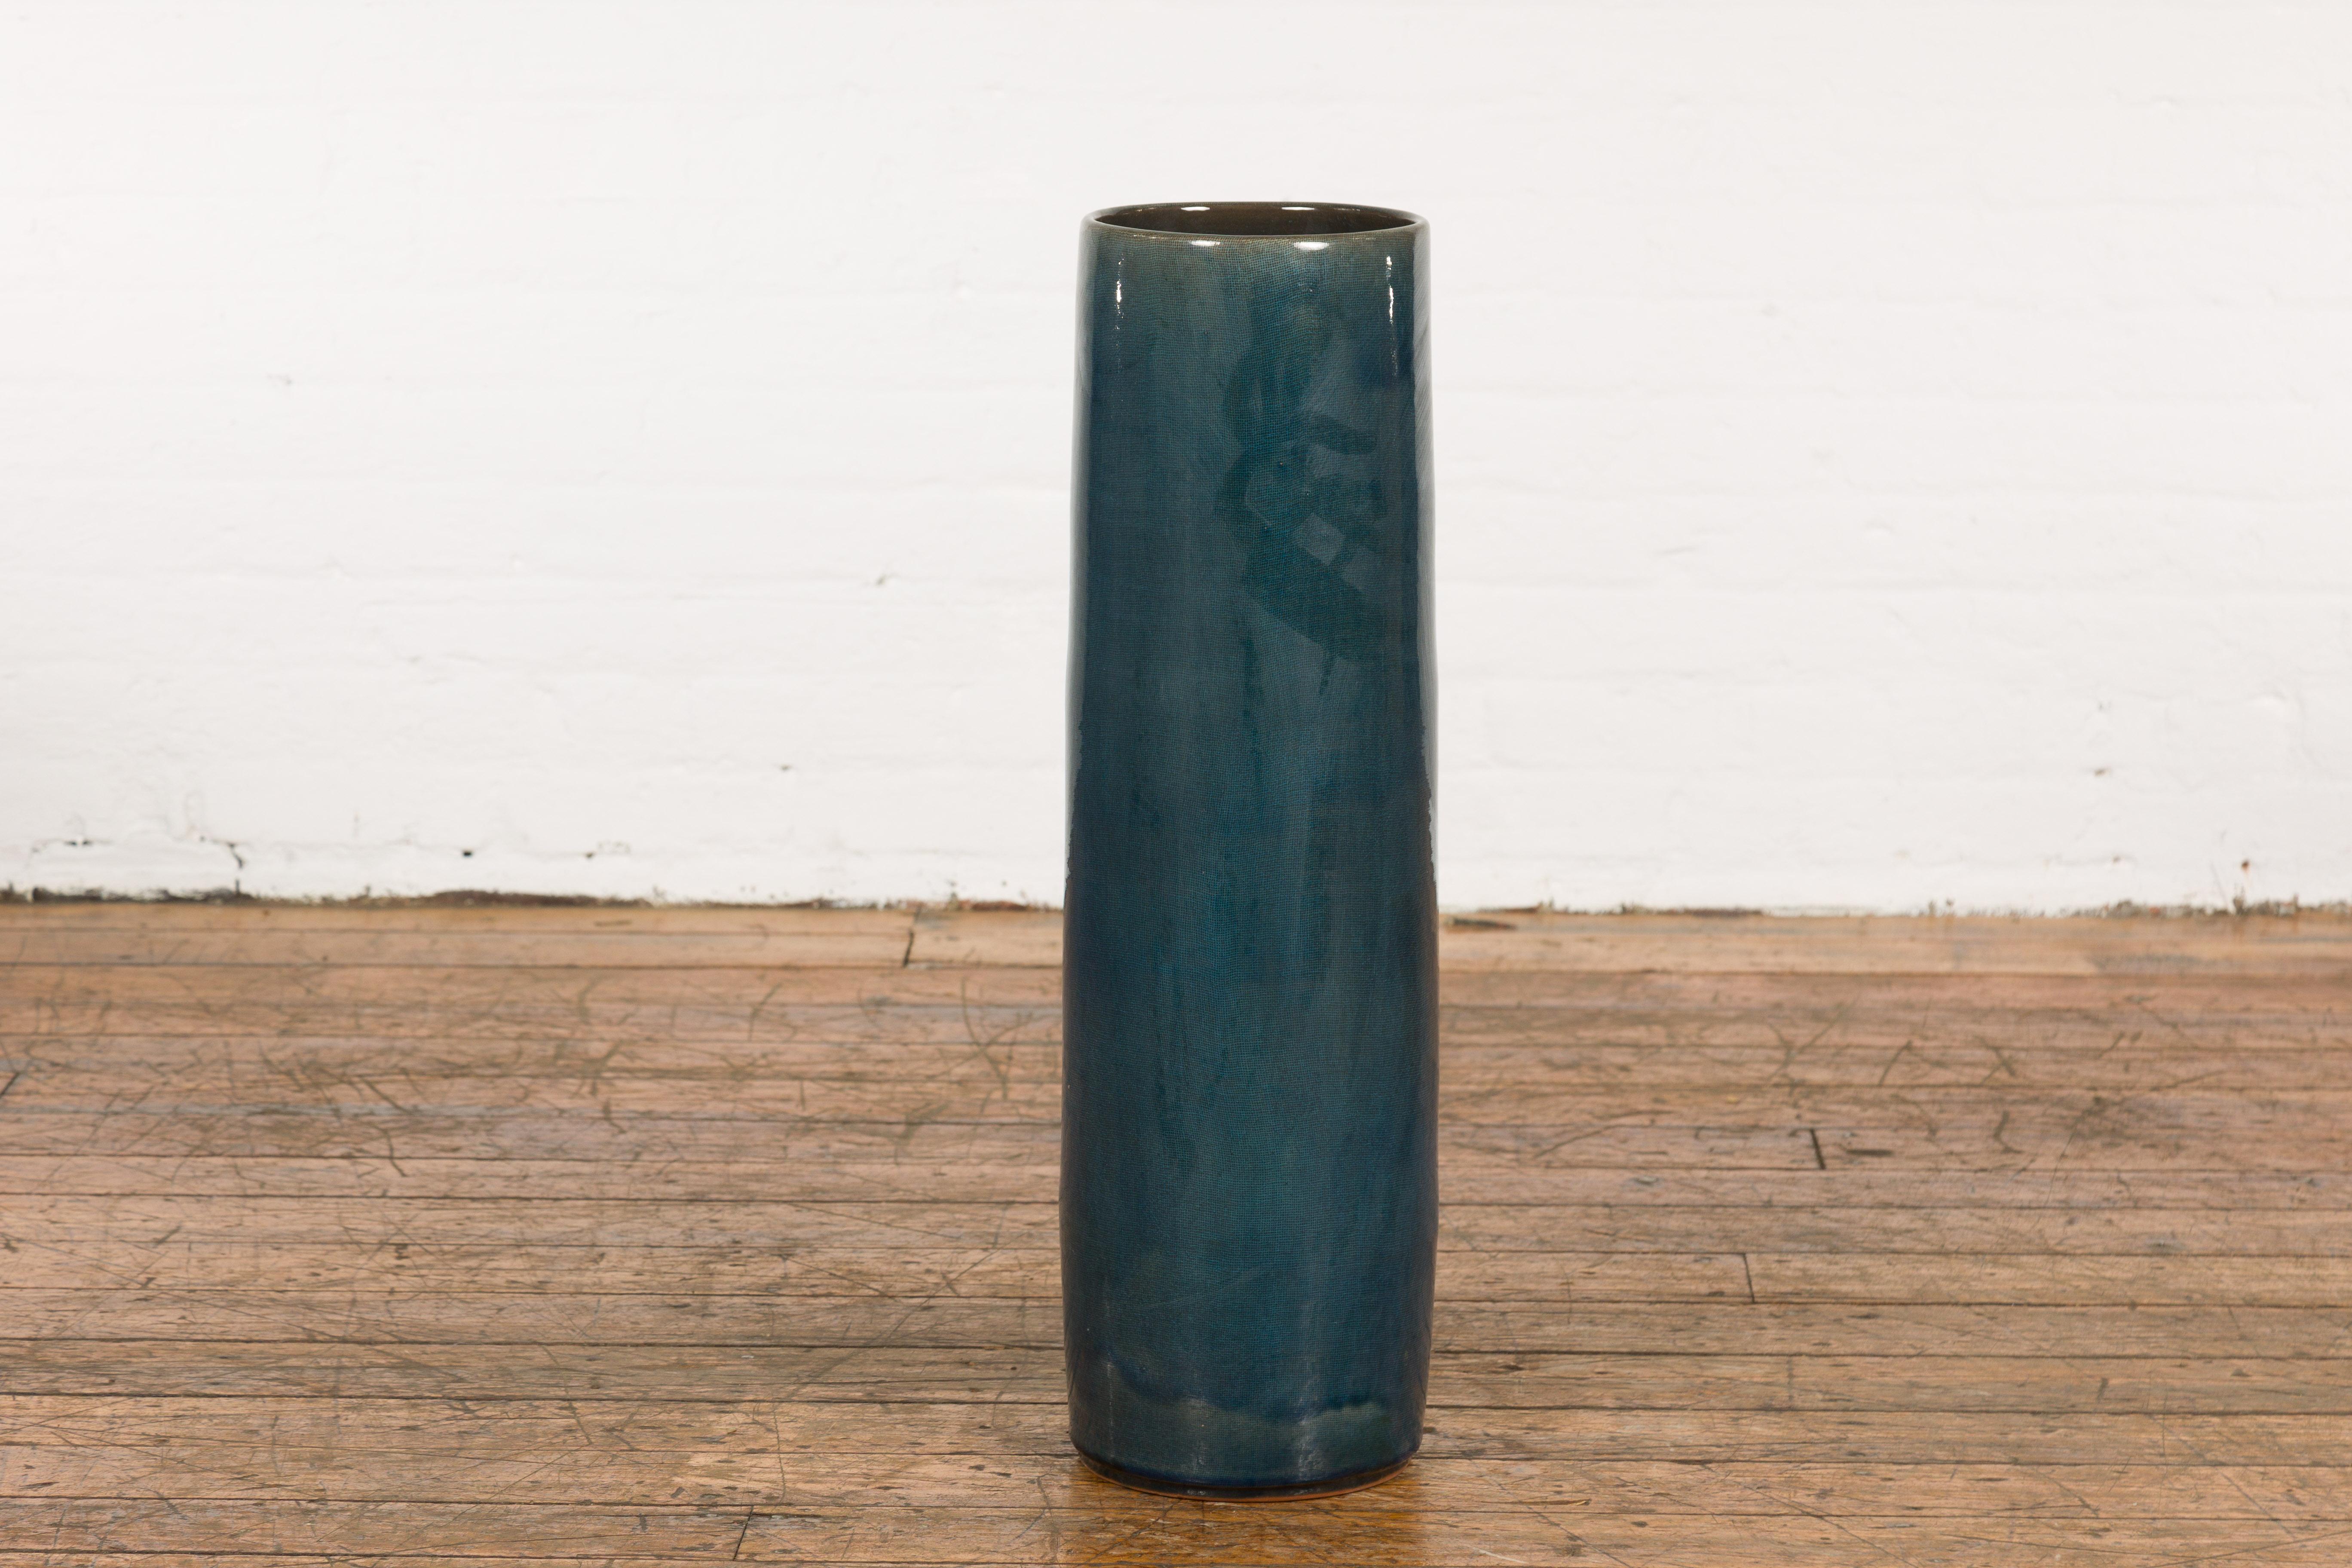 A Prem Collection ceramic handcrafted artisan floor vase with blue textured finish. Showcasing sleek lines and a blue green colored finish, this Prem Collection ceramic handcrafted artisan floor vase will bring an undeniable decorative interest to